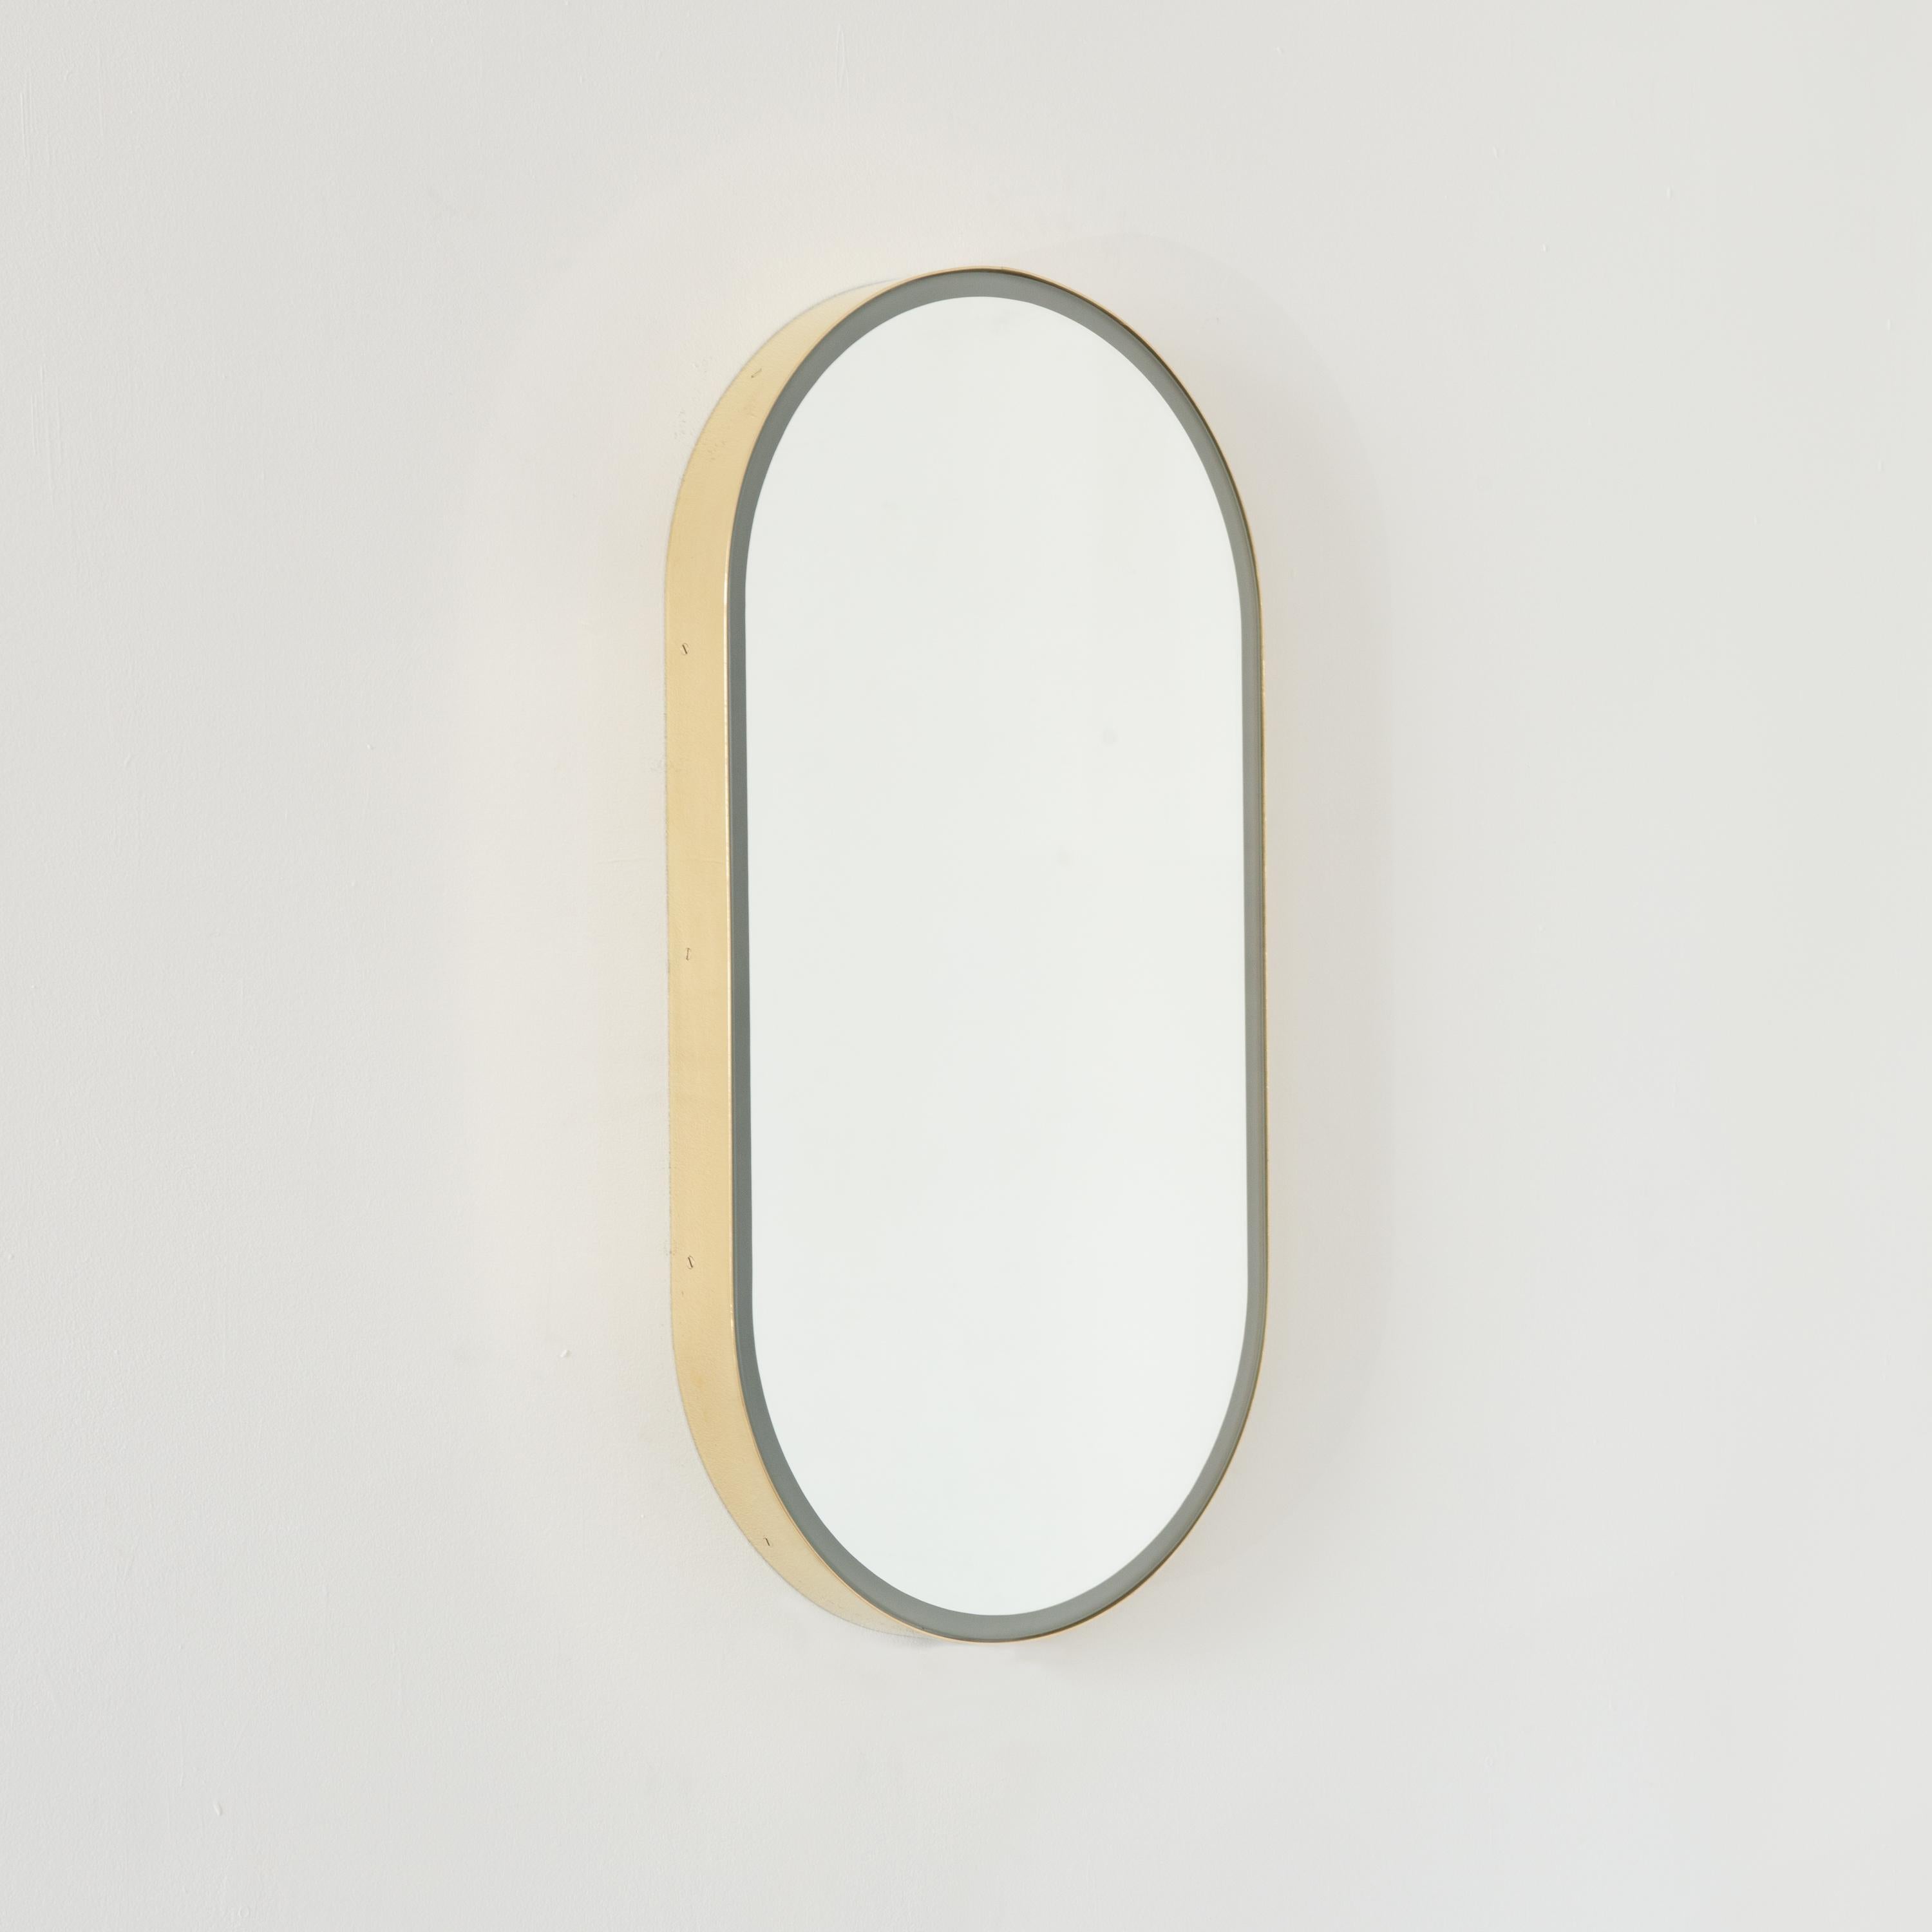 Contemporary Capsula Illuminated Capsule Shaped Customisable Mirror with Brass Frame, Large For Sale